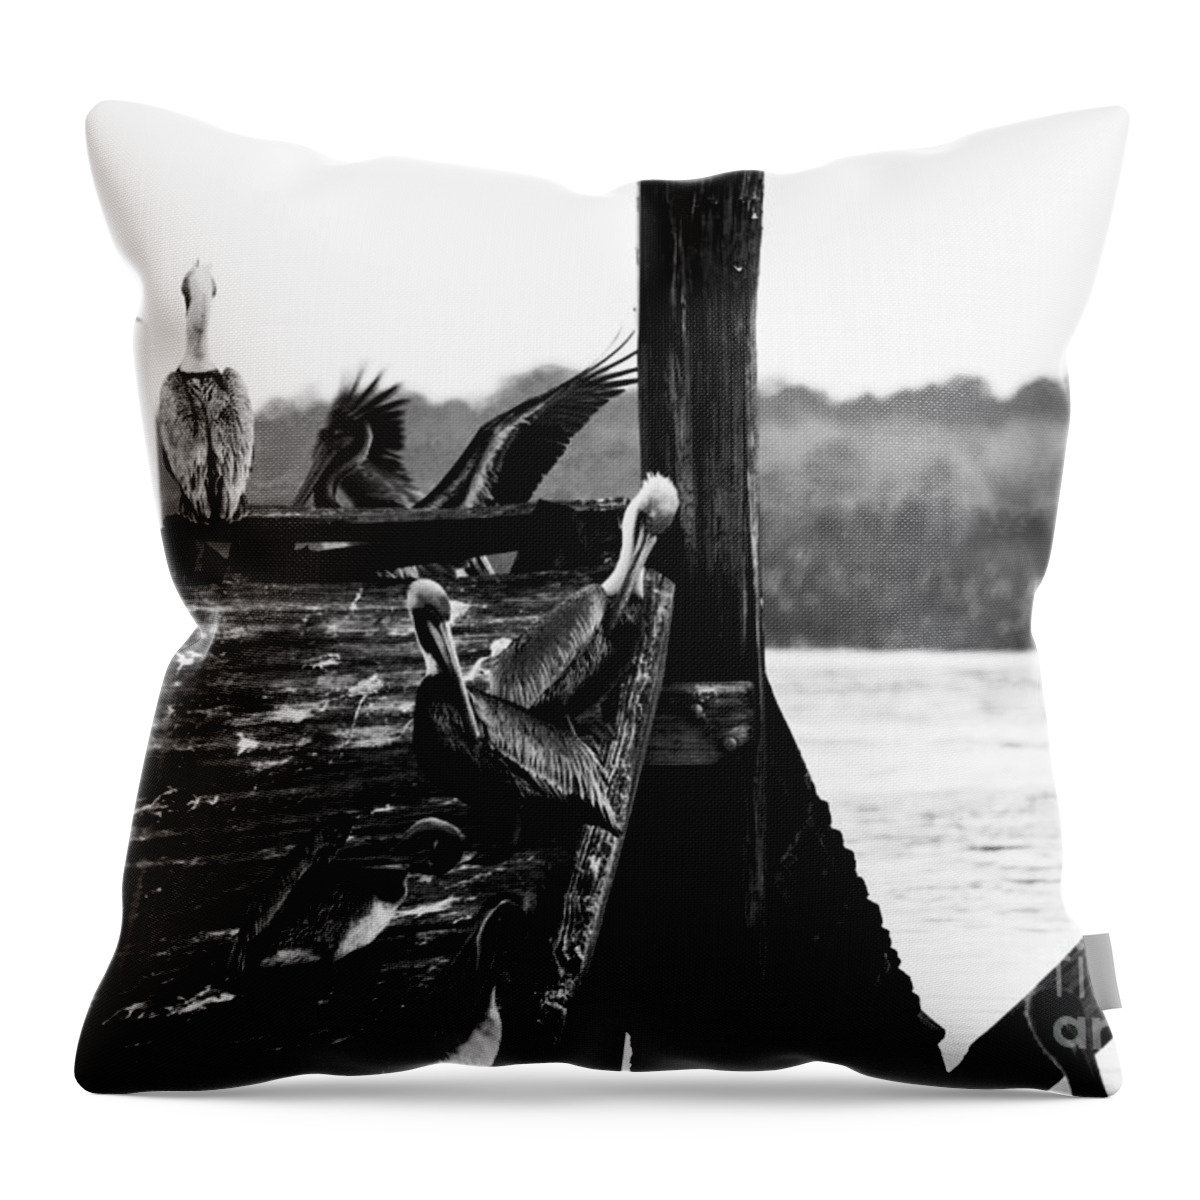 Apalachicola Throw Pillow featuring the photograph Pelicans by Alys Caviness-Gober